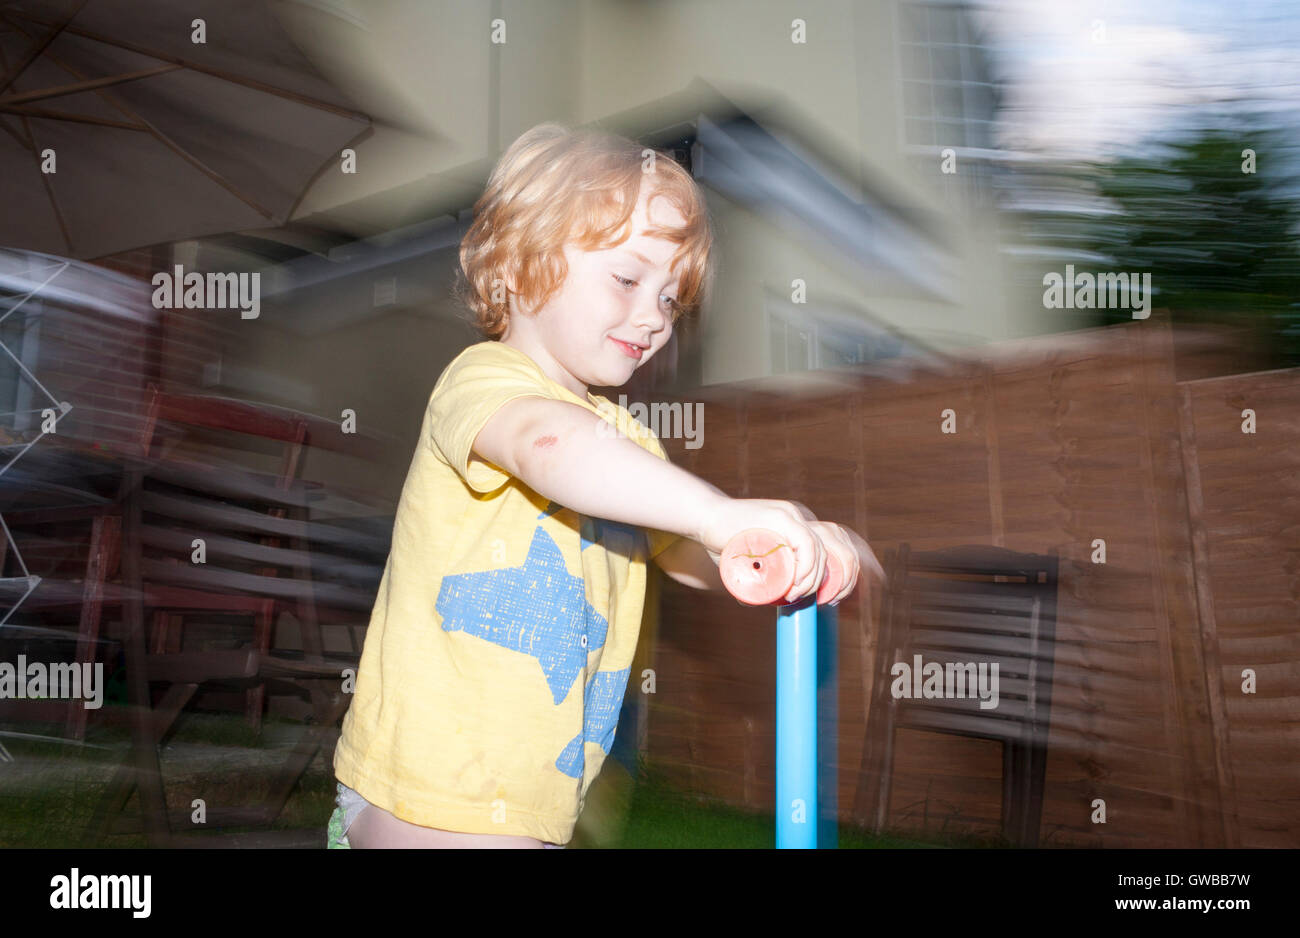 Image of a young 3-year old boy using a scooter in the garden using slow-sync flash technique Stock Photo